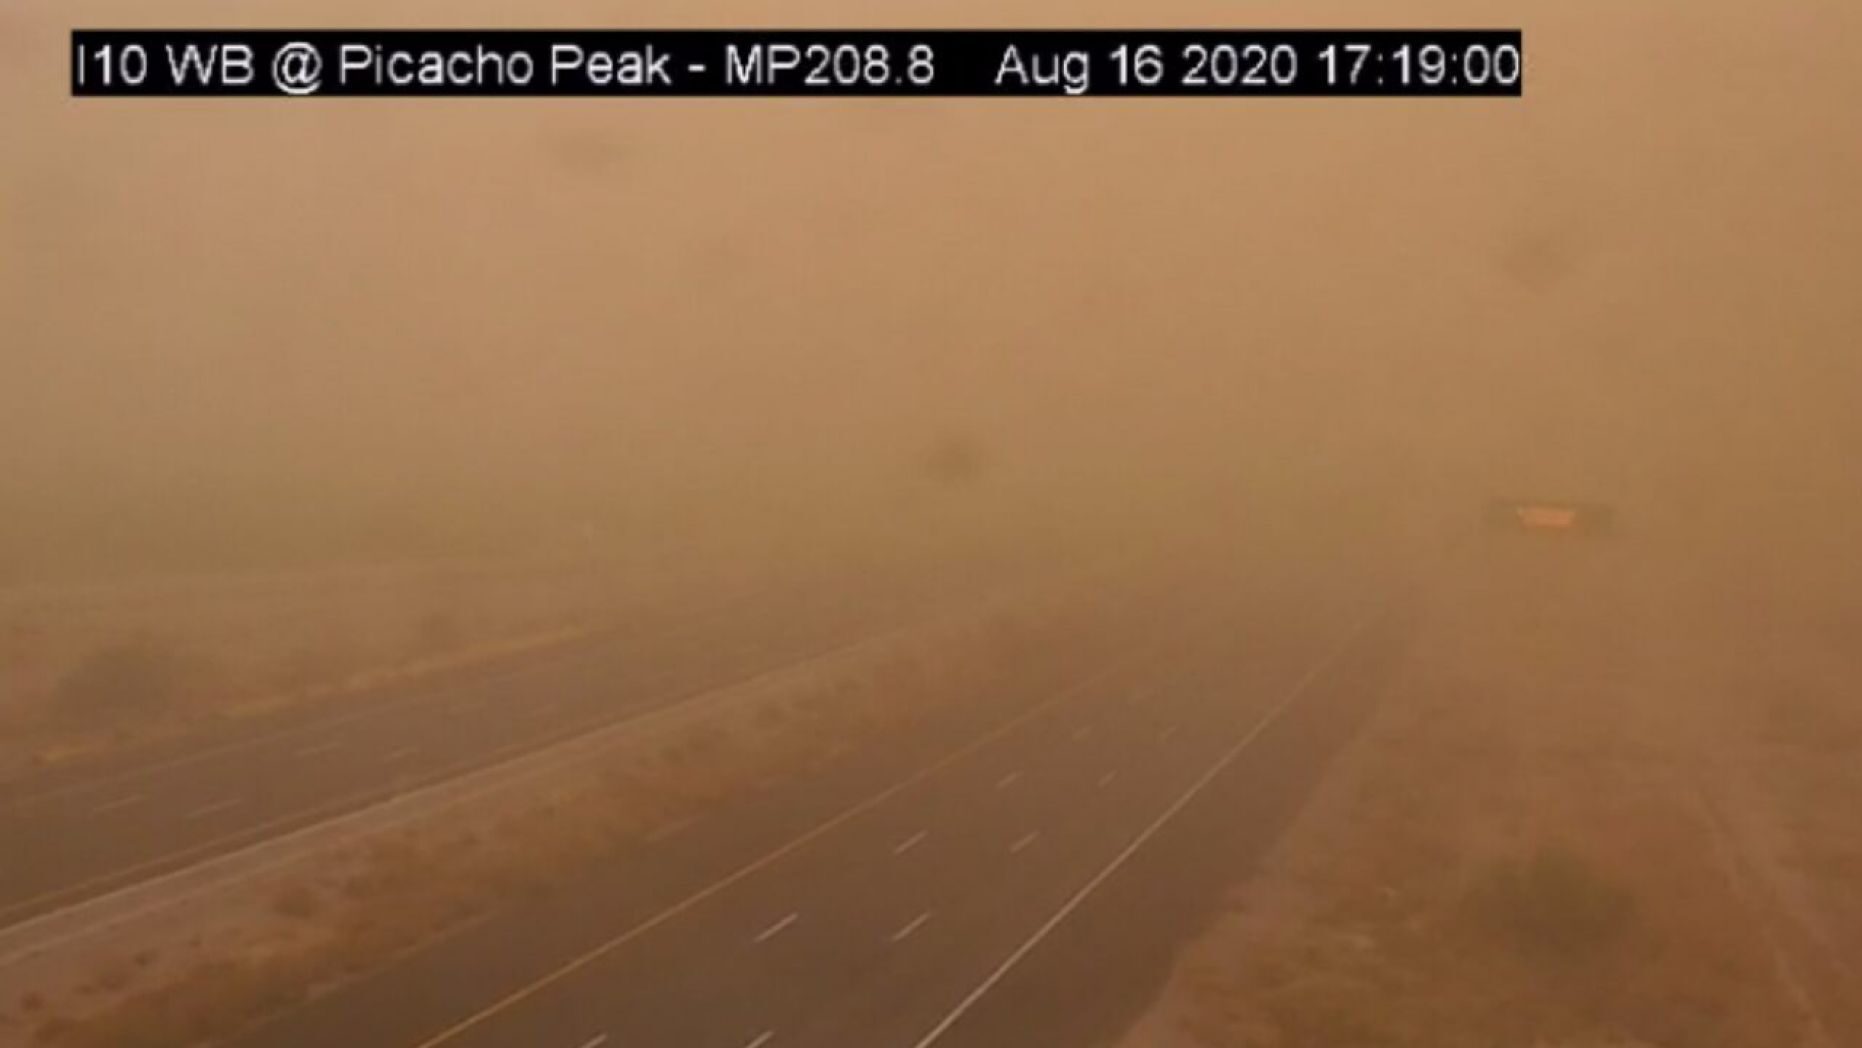 A dust storm can be seen on Sunday, Aug. 16, 2020 on Interstate 10 near Picacho Peak, Arizona.